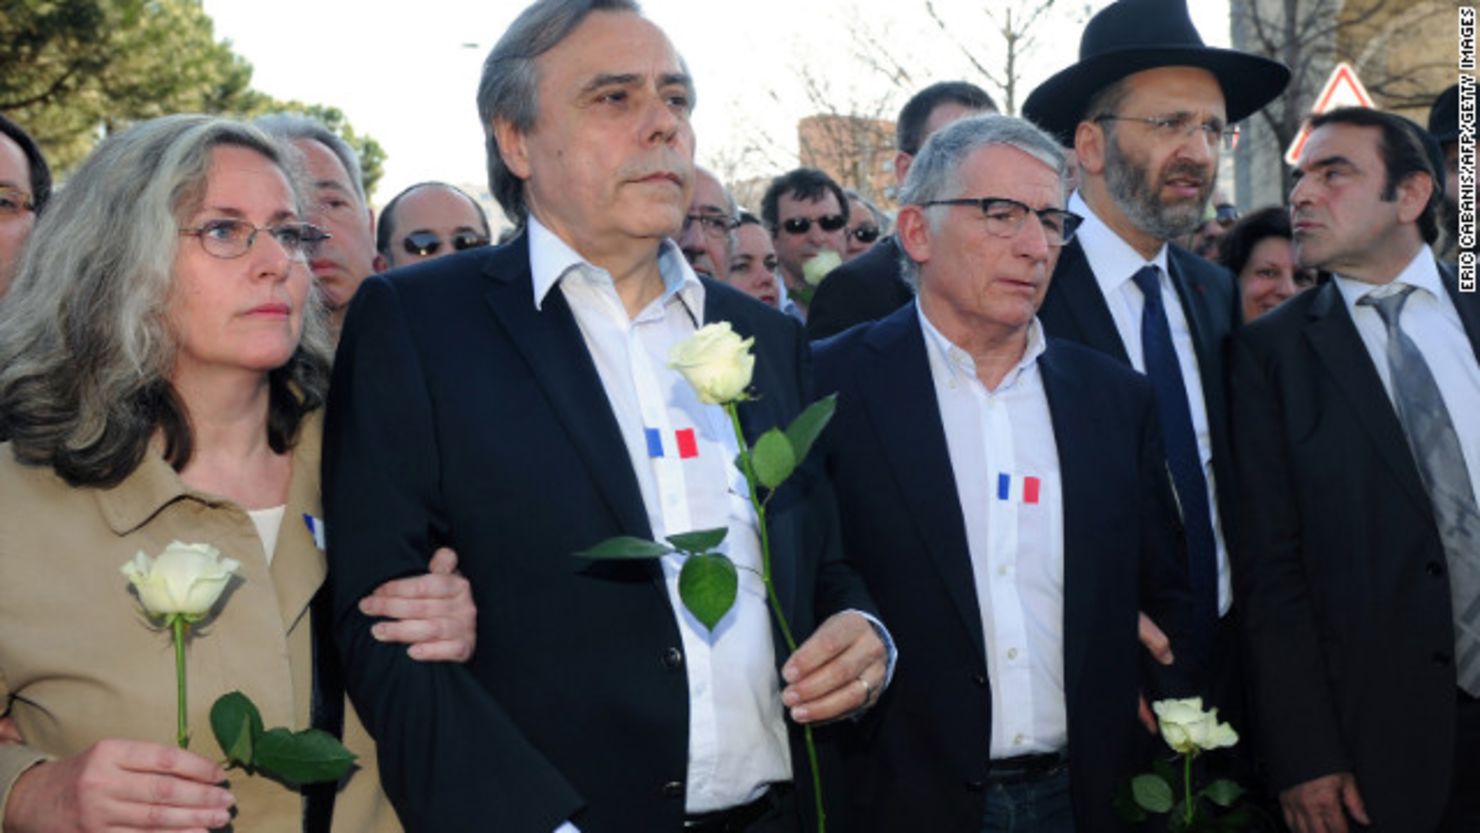 Gilles Bernheim, Great Rabbi of France (2nd from right), and others march on March 25 in Toulouse, France where three Jewish children and their teacher were killed.